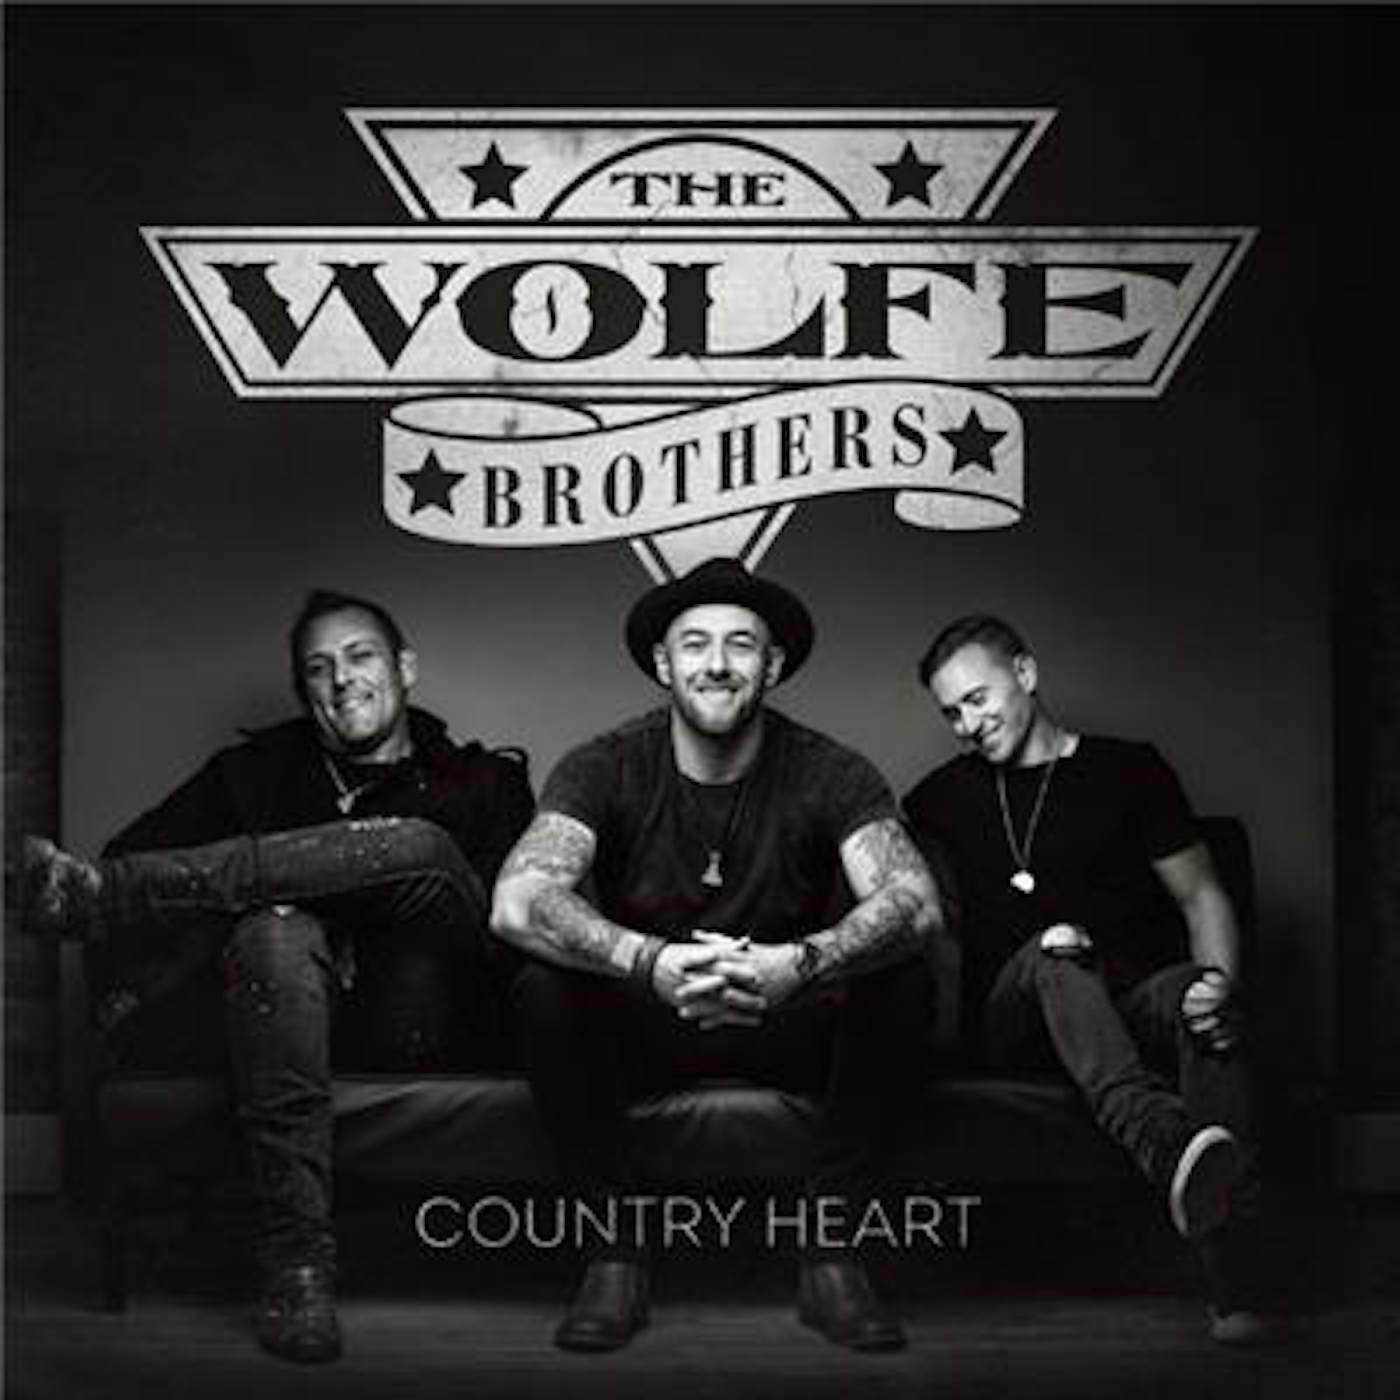 The Wolfe Brothers - Country Heart Signed CD